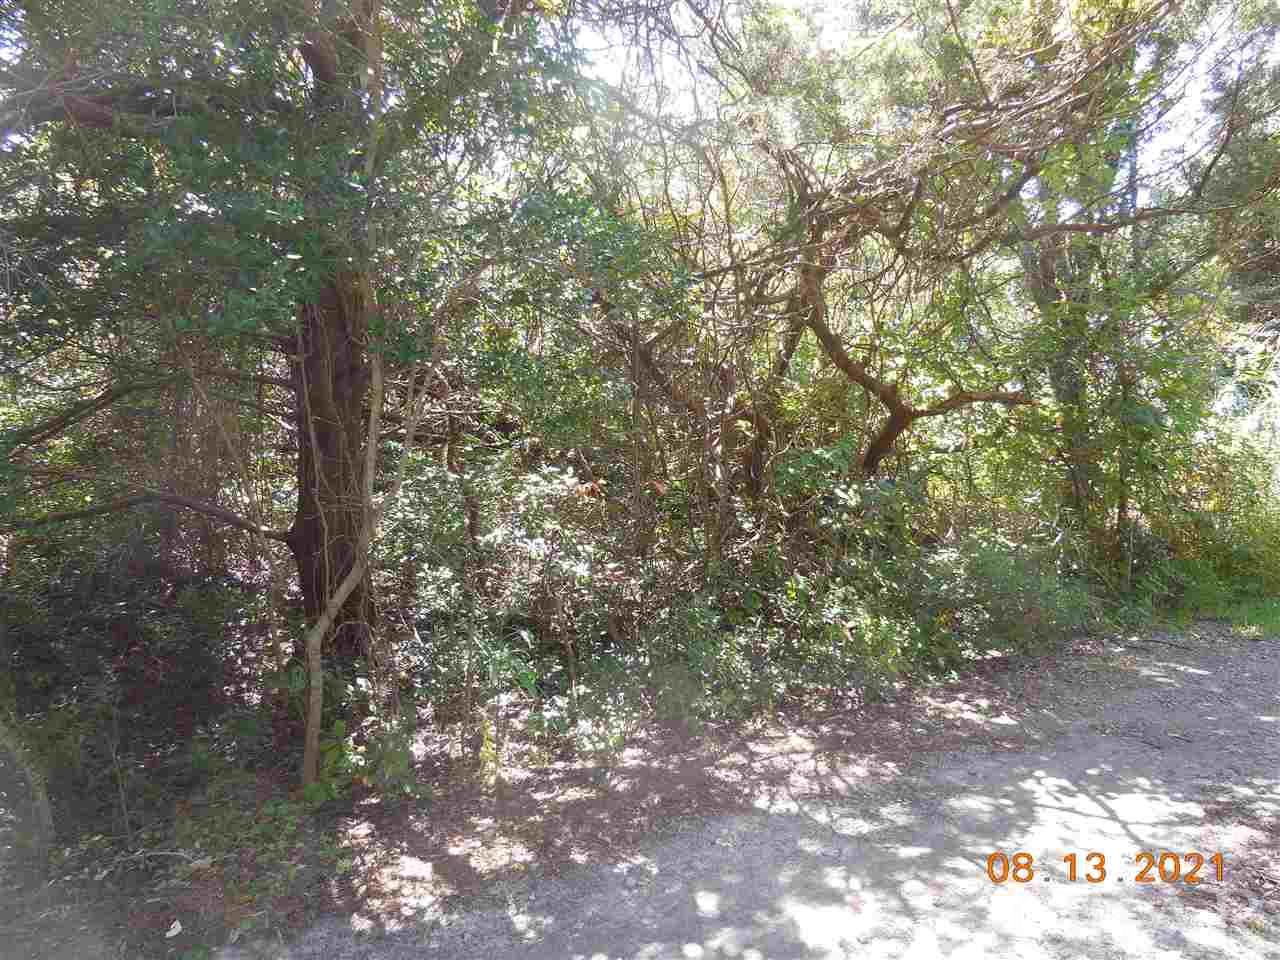 A beautiful 12,367 sq. ft. building lot in a private residential location with a good mix of rentals and year-round neighbors. Installed 3 bedroom septic system and a 3 bed/2 bath water meter convey with the sale. This oversized property has many mature trees, is off the beaten path and has the possibility of a marsh and sound view from a reversed plan home or rooftop deck! Great location for stargazing and sunsets! A wonderful setting for your Ocracoke dream home or trailer hook-up.